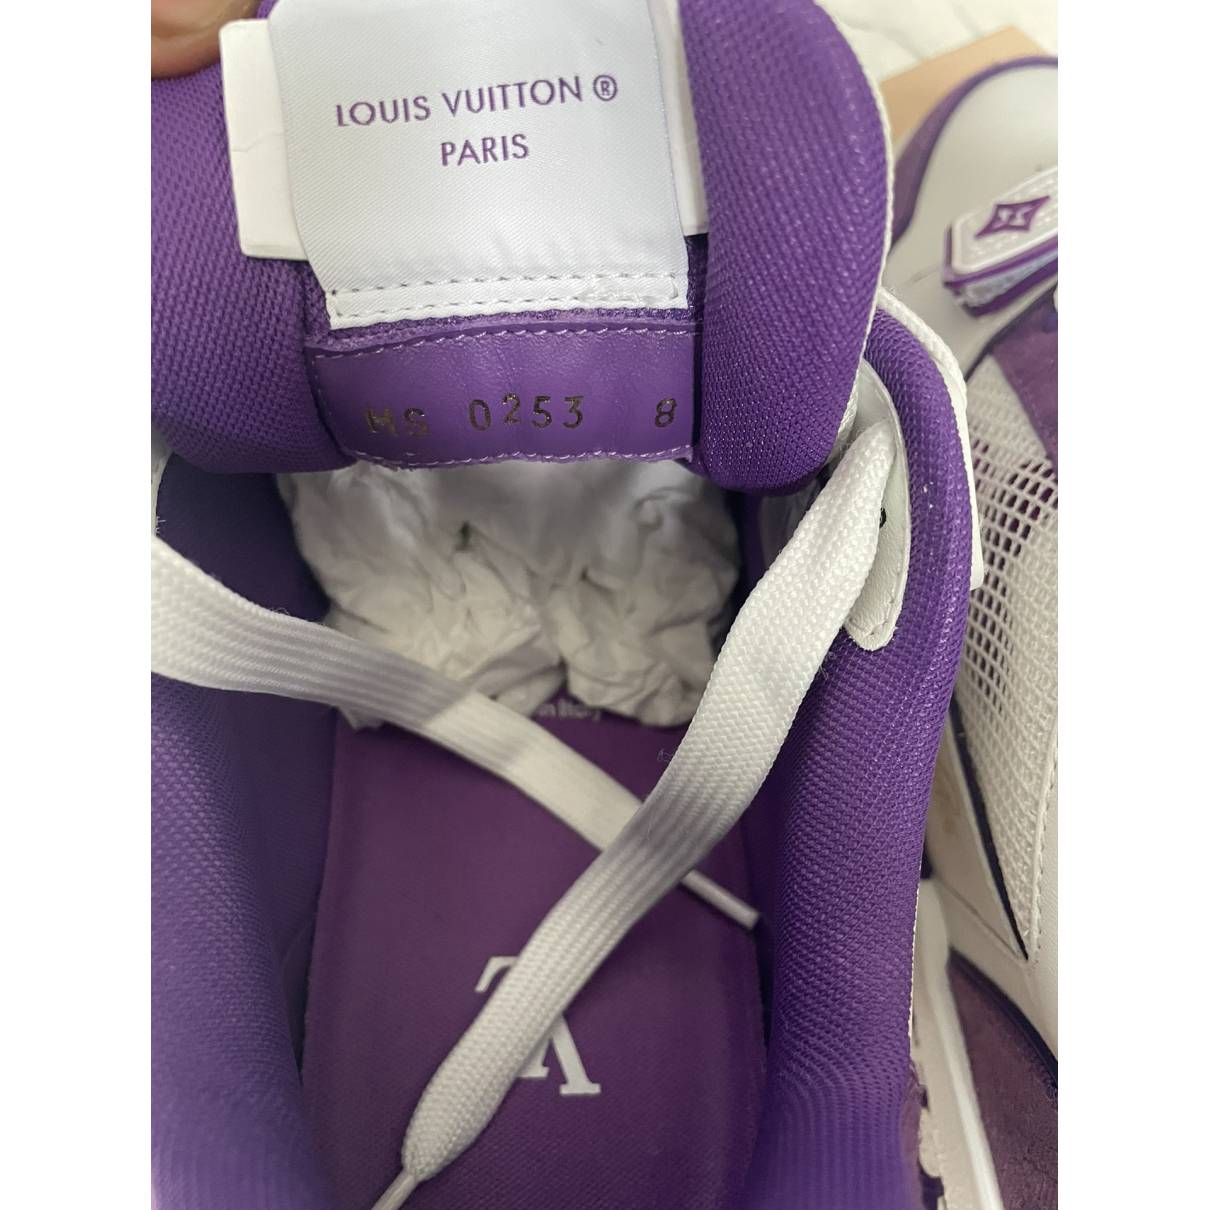 Lv trainer leather low trainers Louis Vuitton Purple size 8 UK in